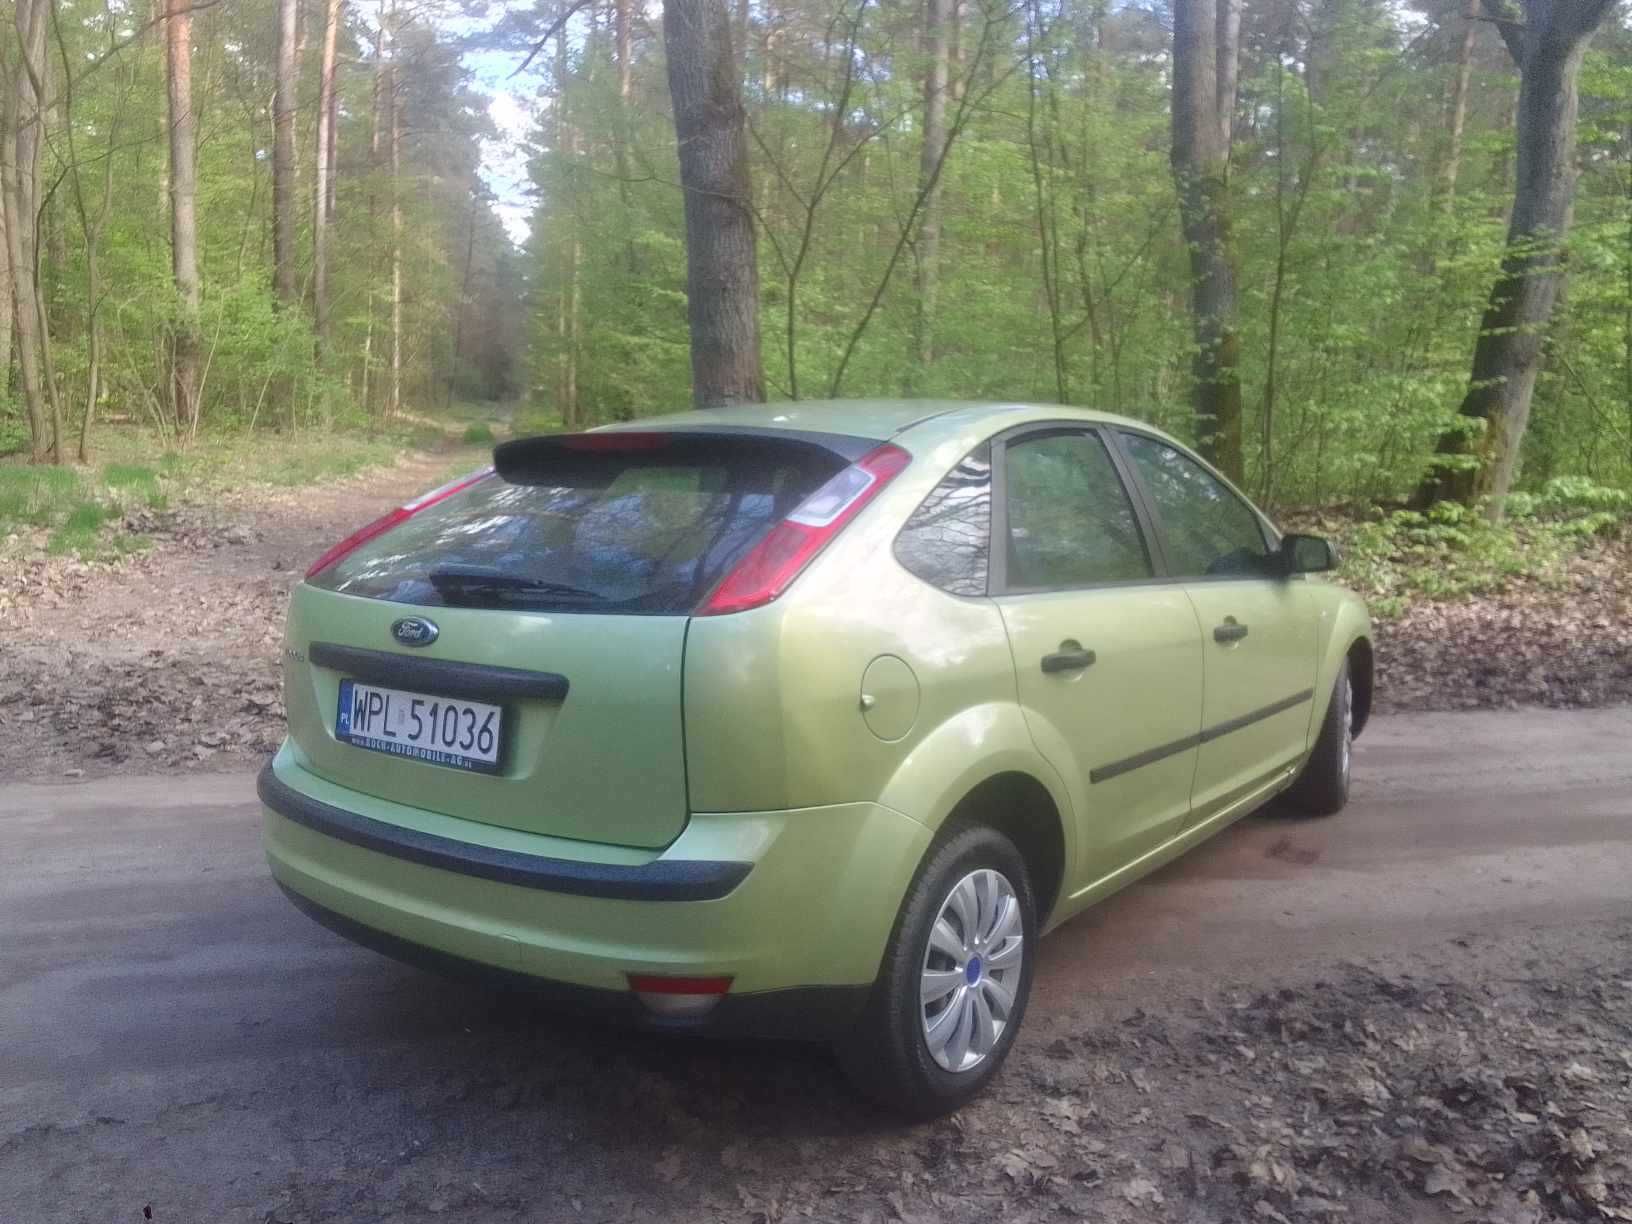 Ford Focus 2005 1,6benzyna